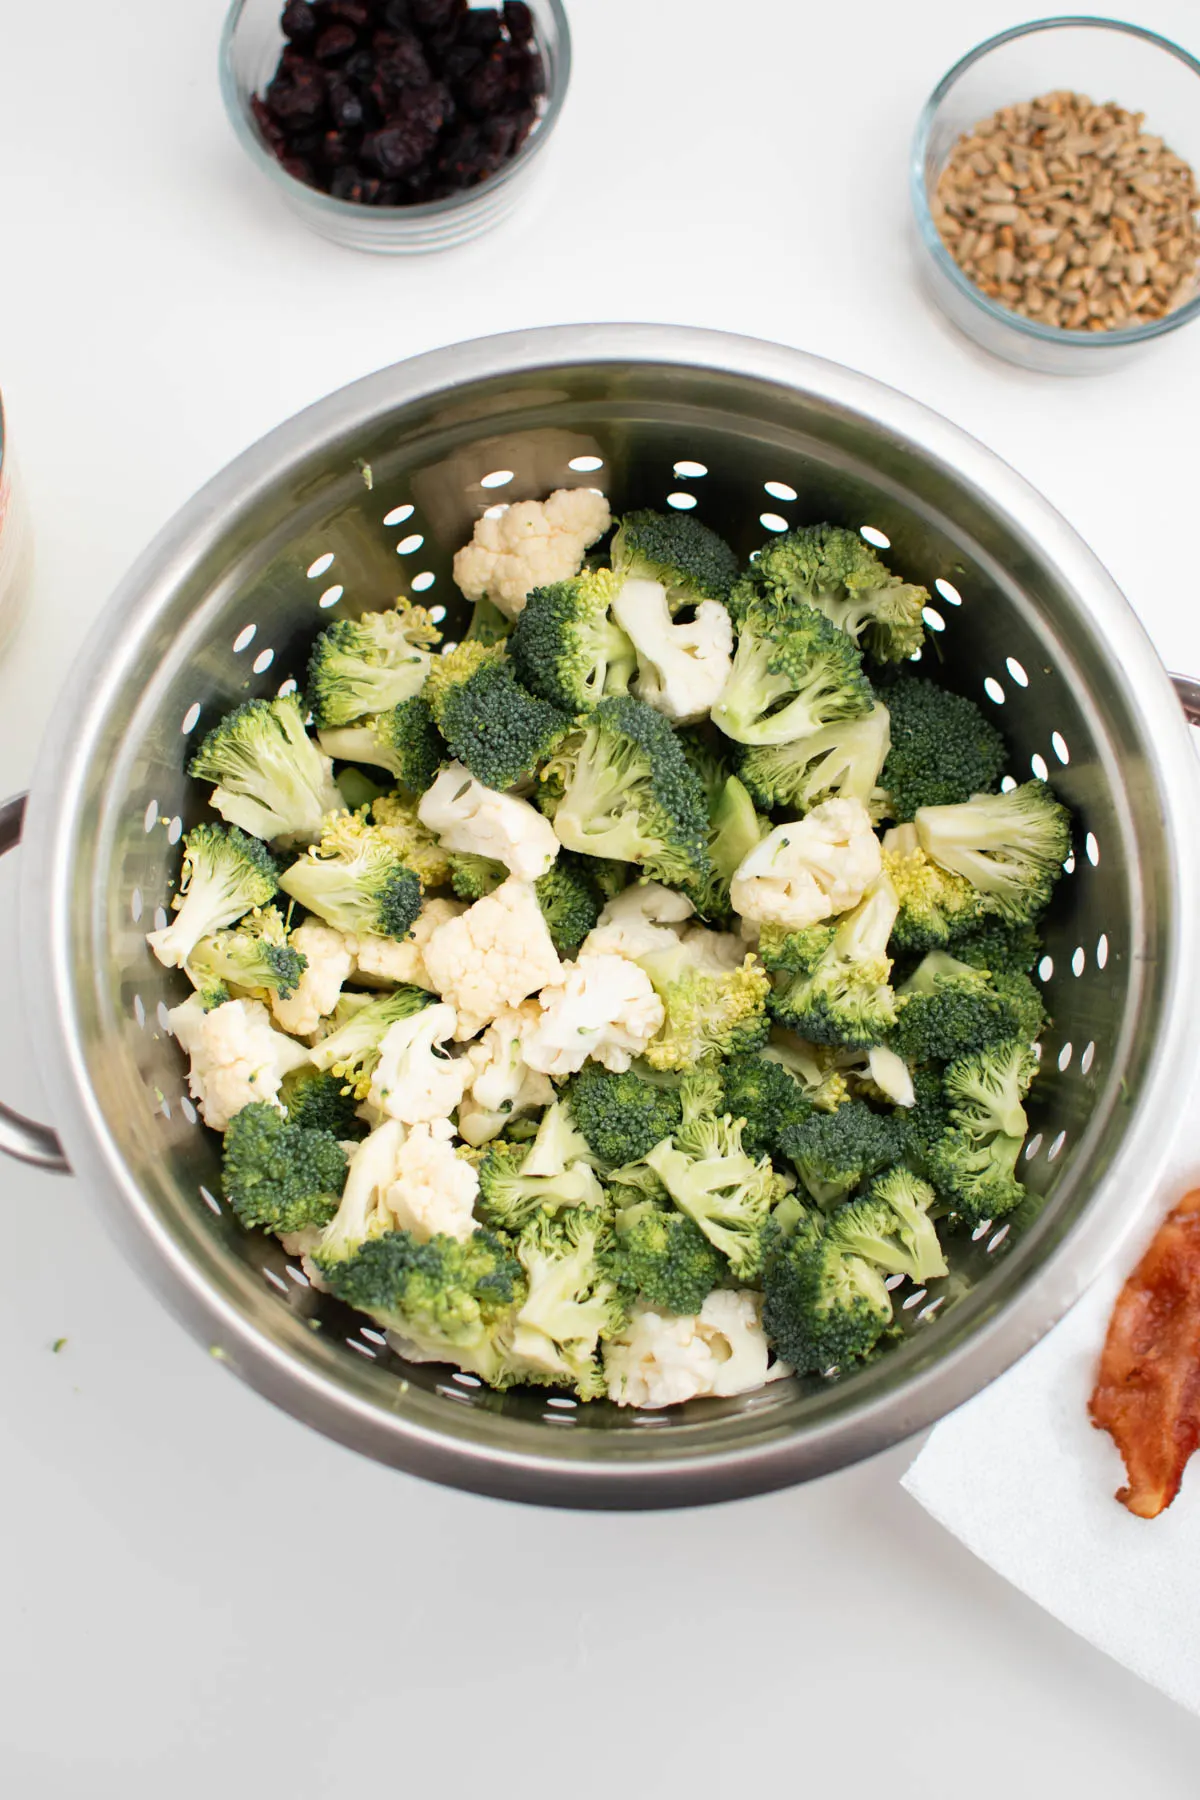 Broccoli and cauliflower florets in strainer on white table with bowls of ingredients nearby.